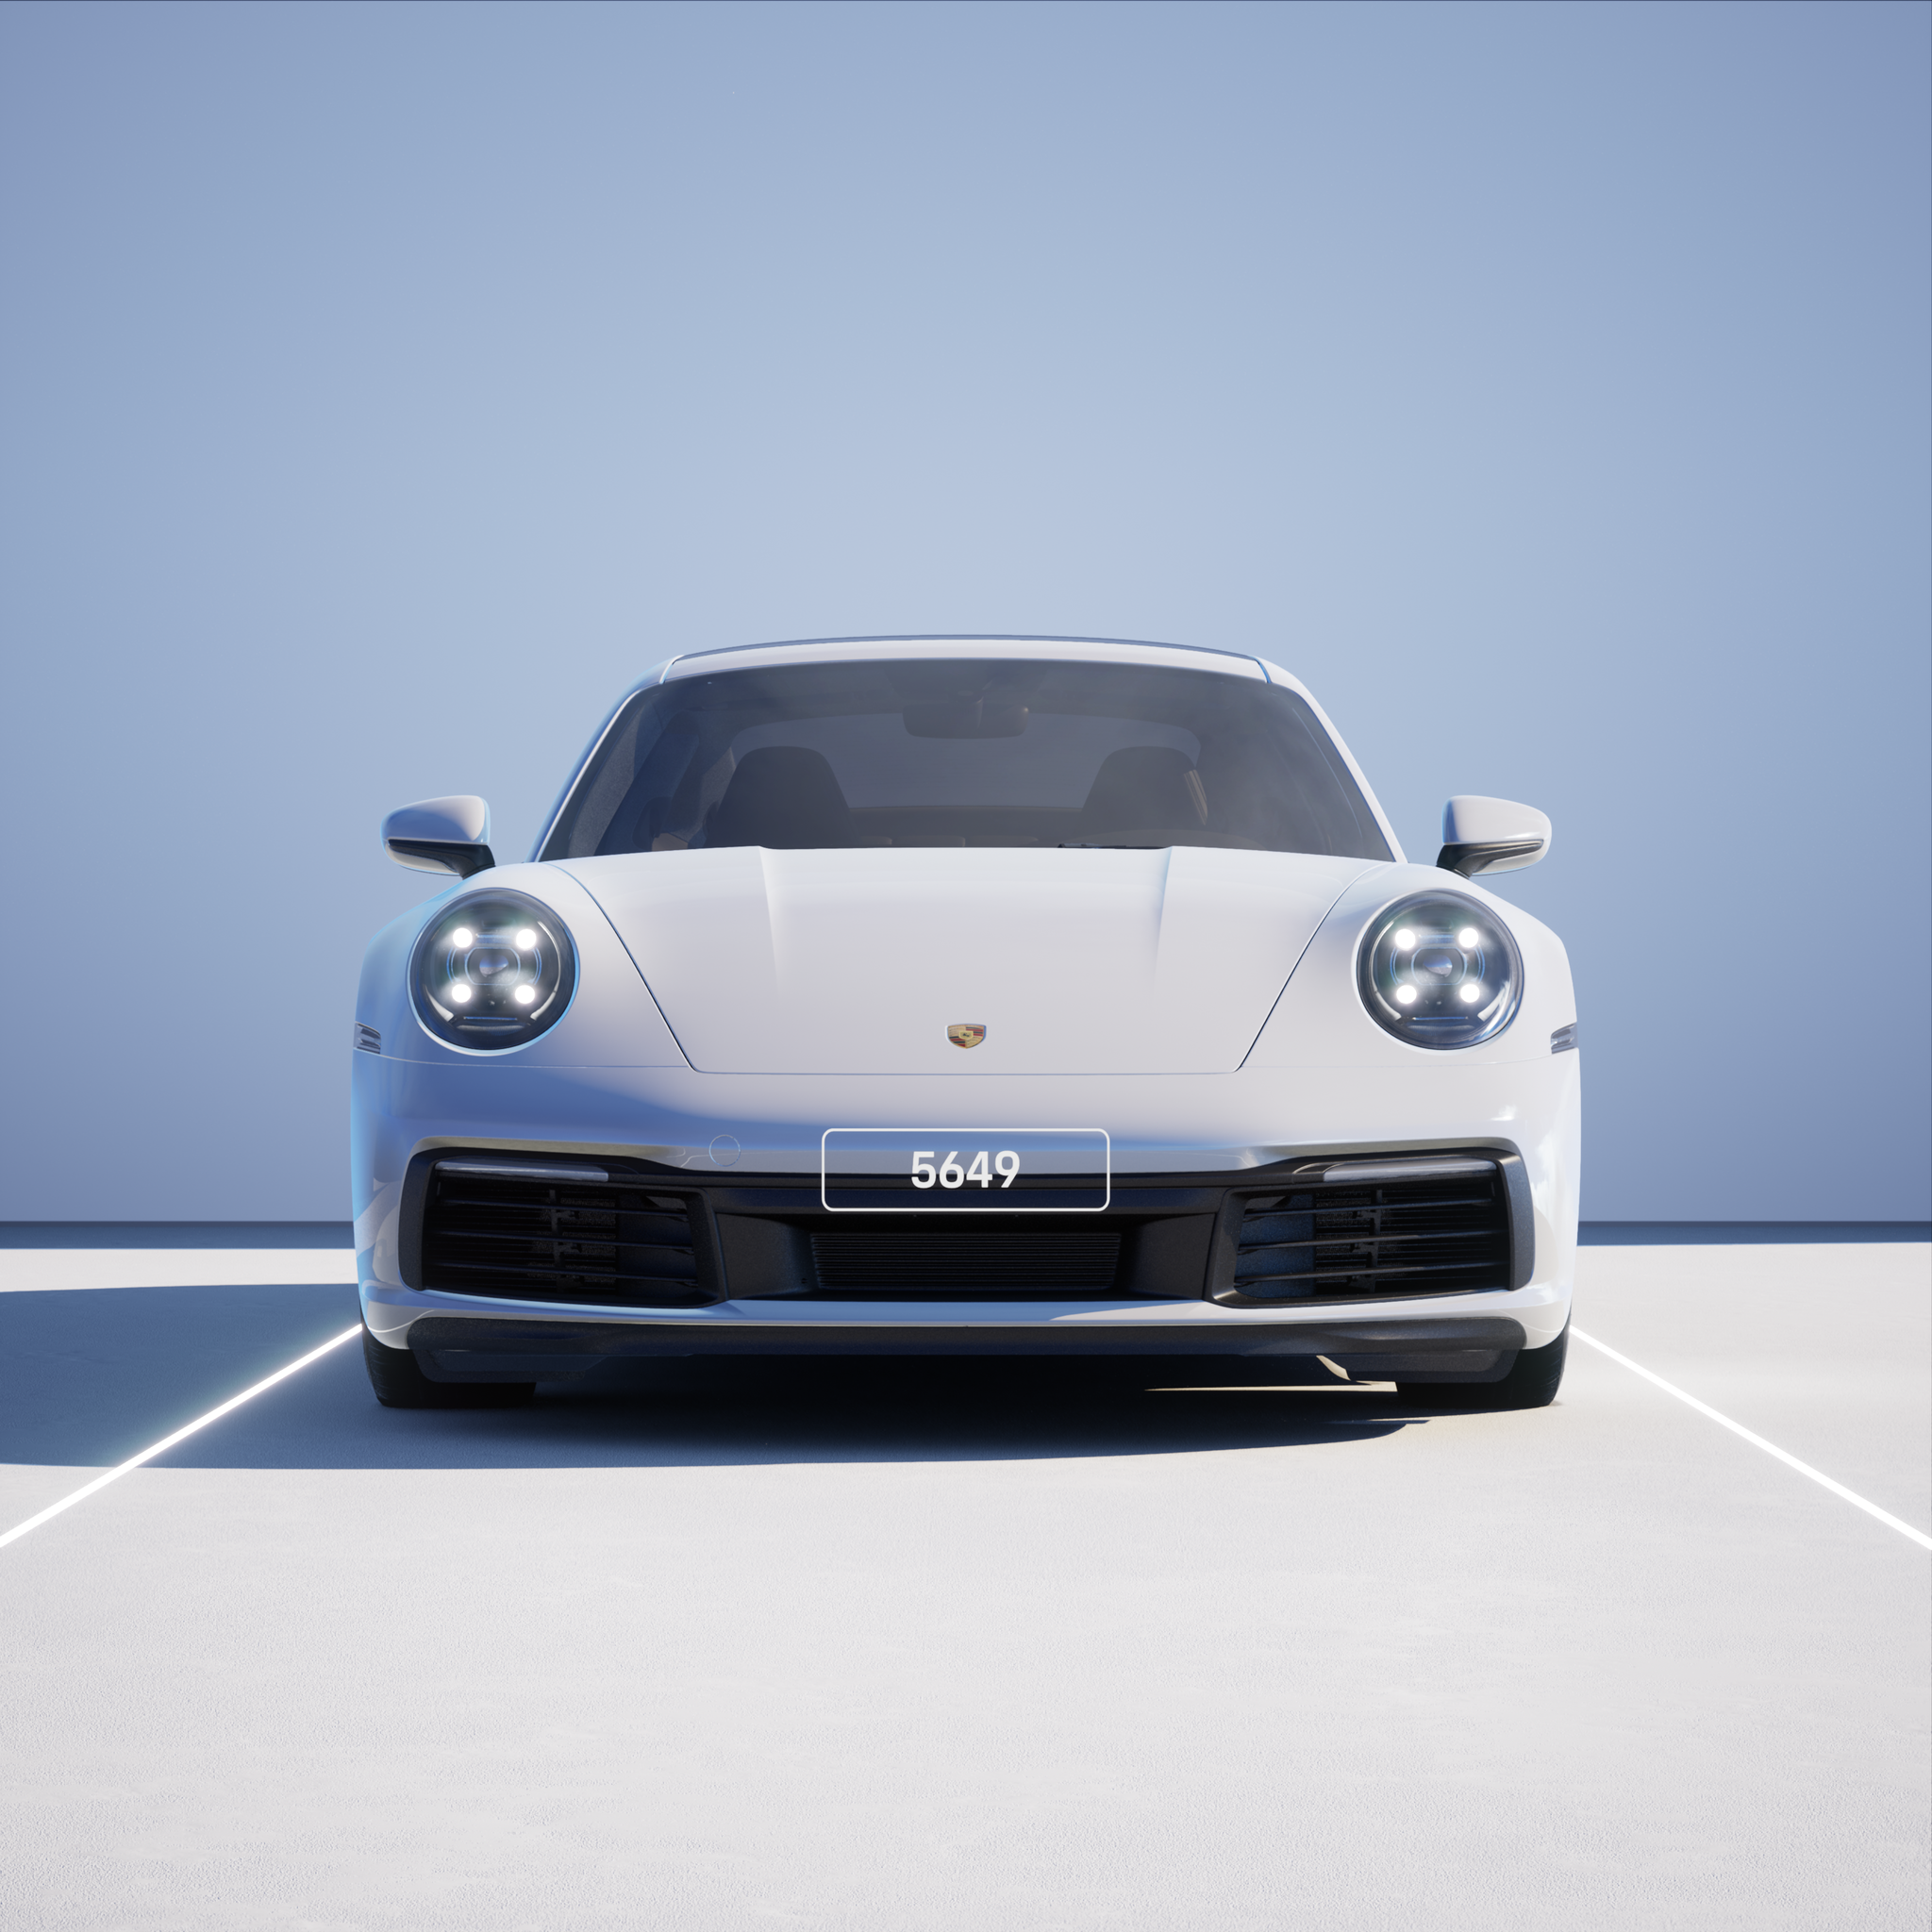 The PORSCHΞ 911 5649 image in phase